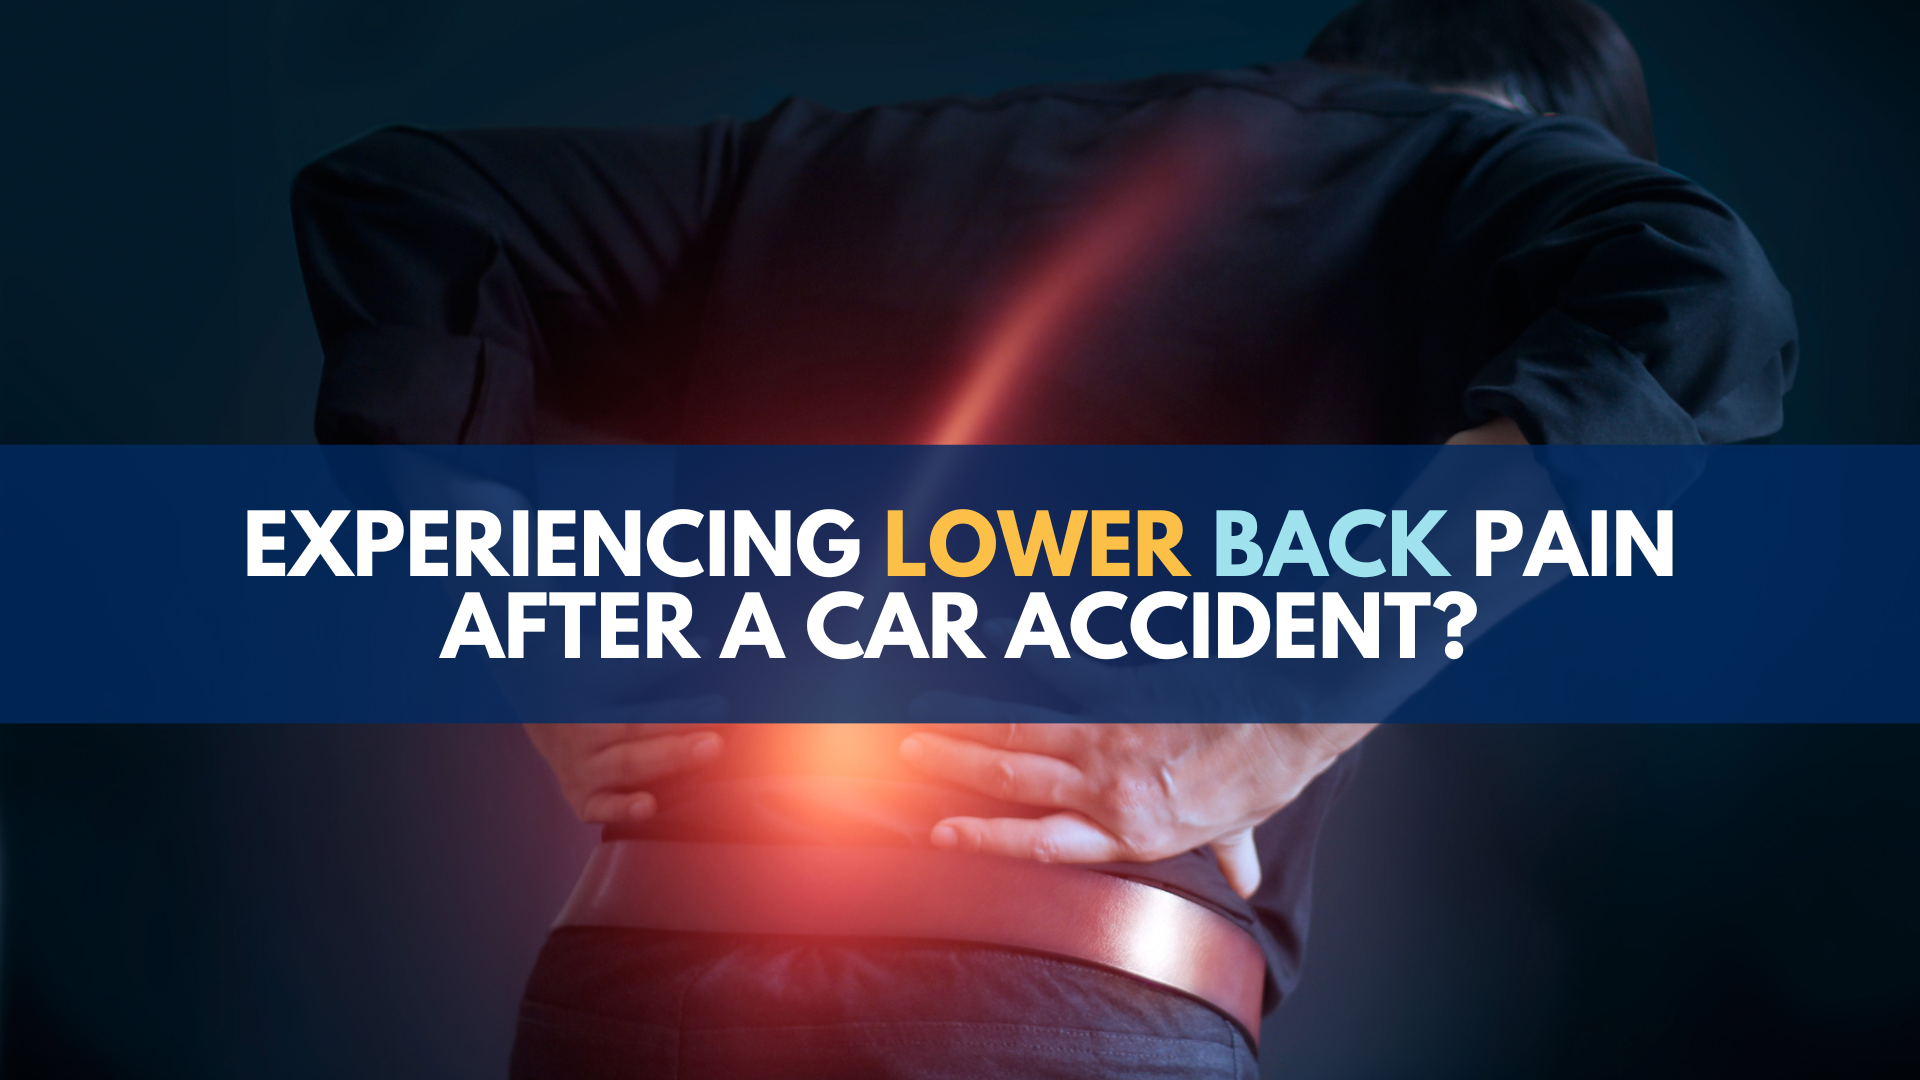 Lower back pain after an accident